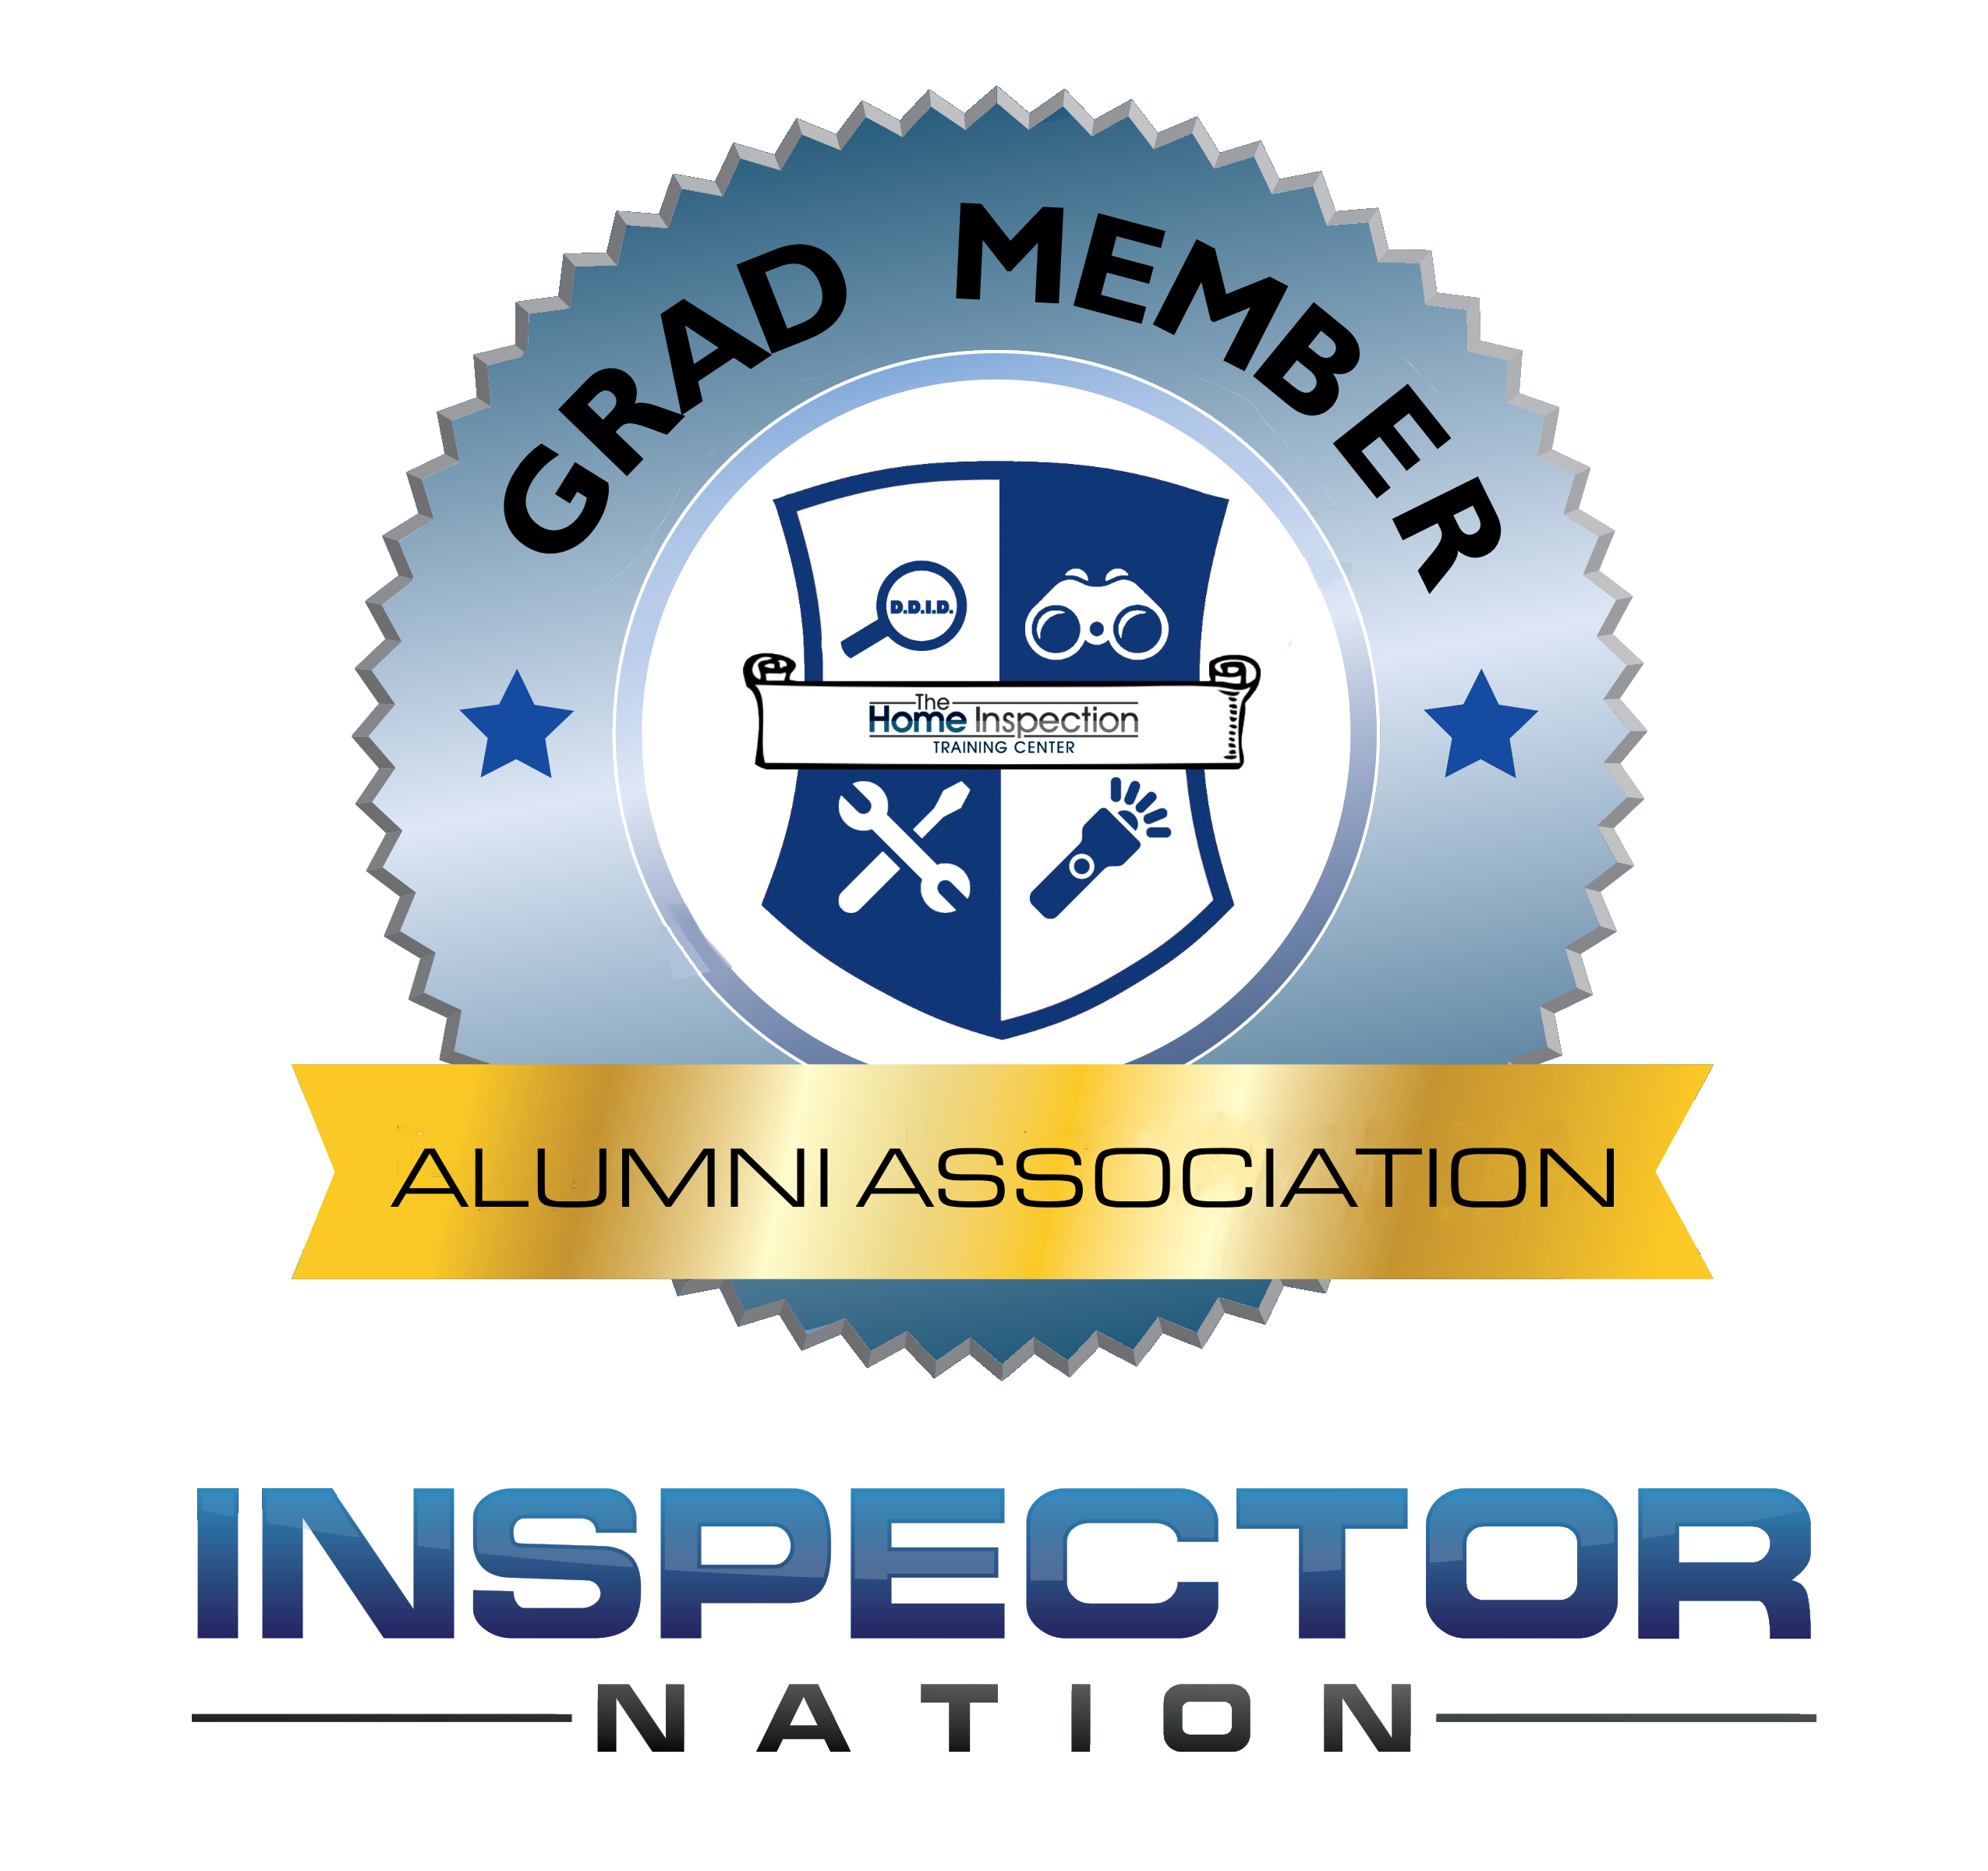 graduate of the home inspection training center (thitcenter) prelicensing education program inspector nation certified home inspector badge emblem icon